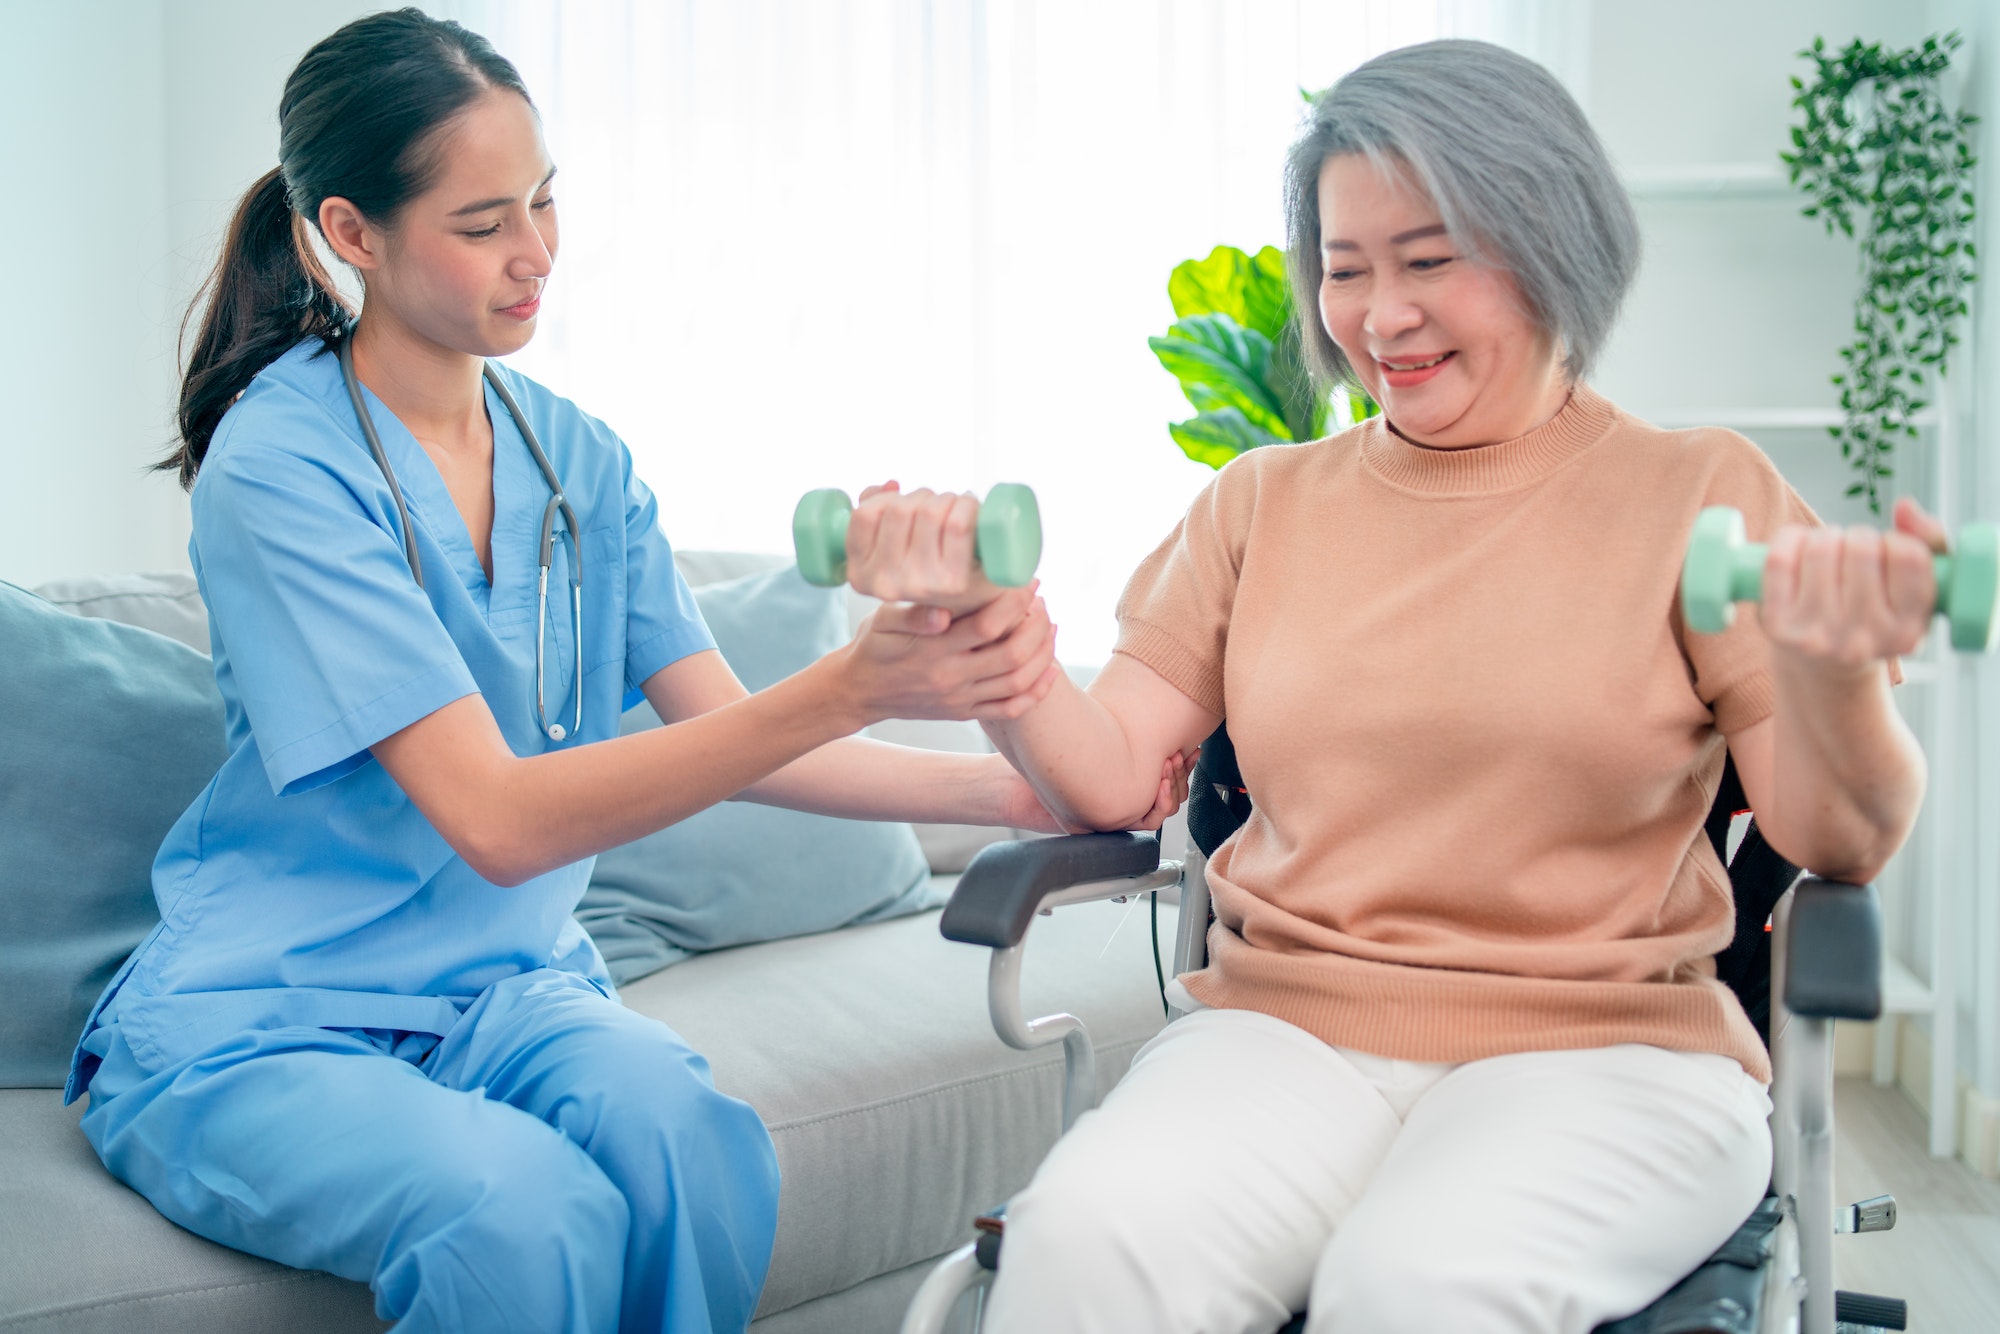 asian-nurse-or-doctor-who-work-as-homecare-support-staff-help-senior-woman-exercise.jpg